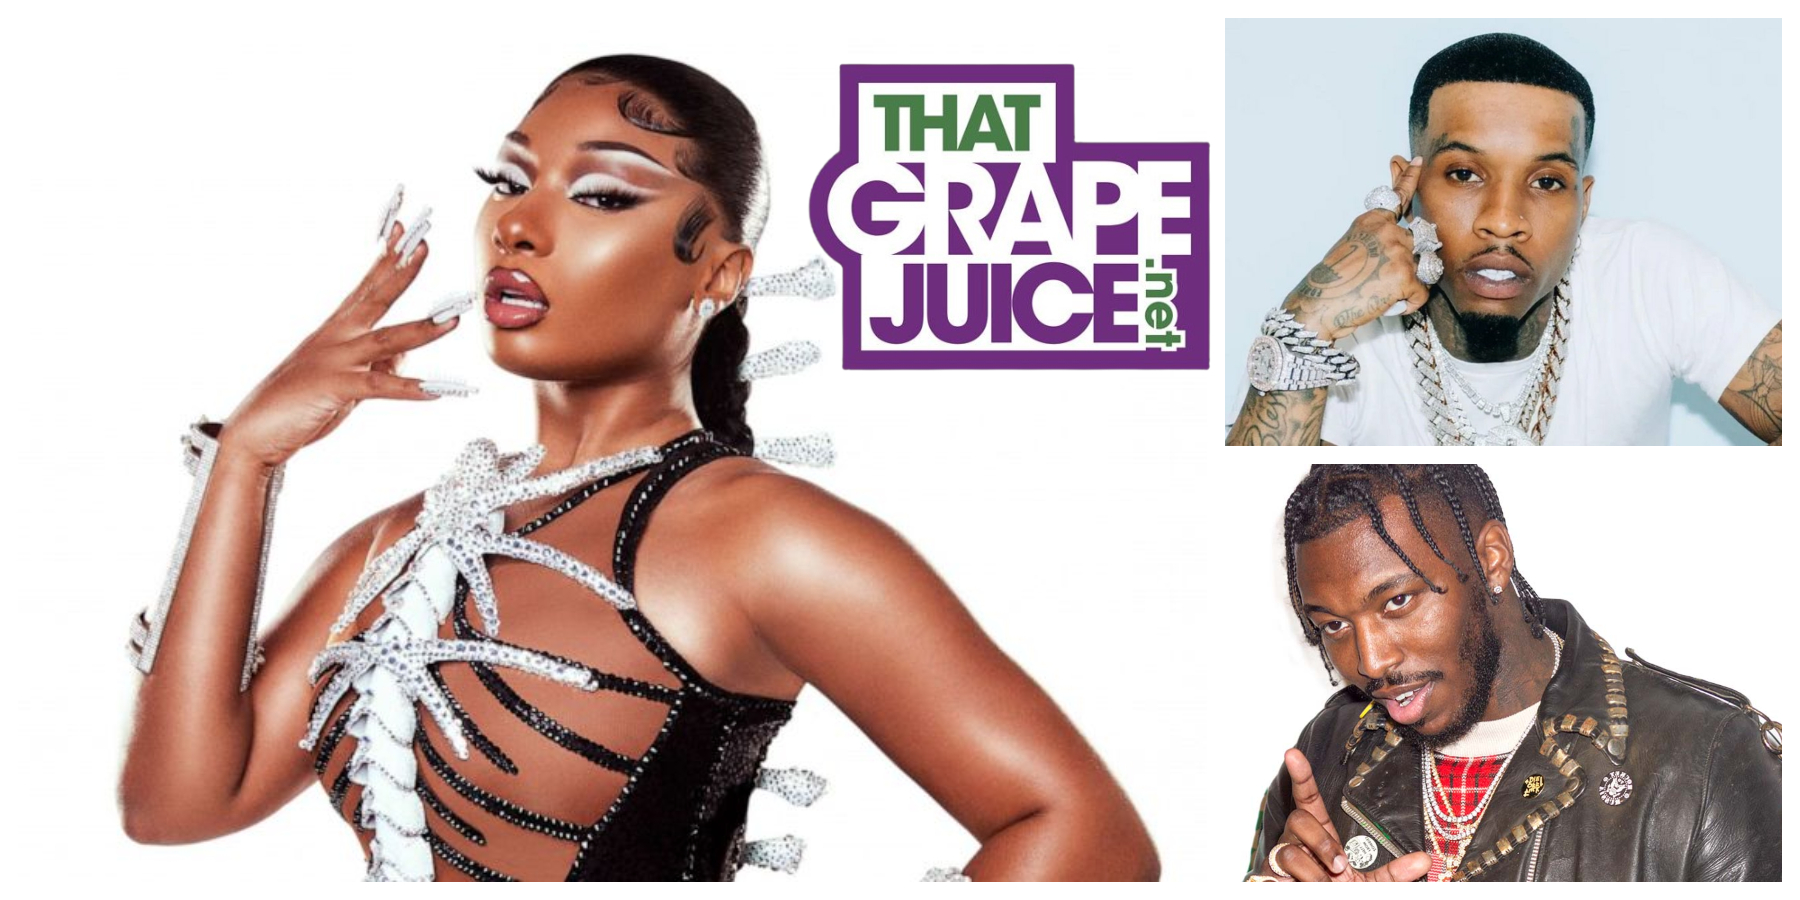 “I Know Who Shot Me & That’s Why He’s in Jail”: Megan Thee Stallion Sounds Off on Tory Lanez Drama, Slams Pardi, & More in IG Rant